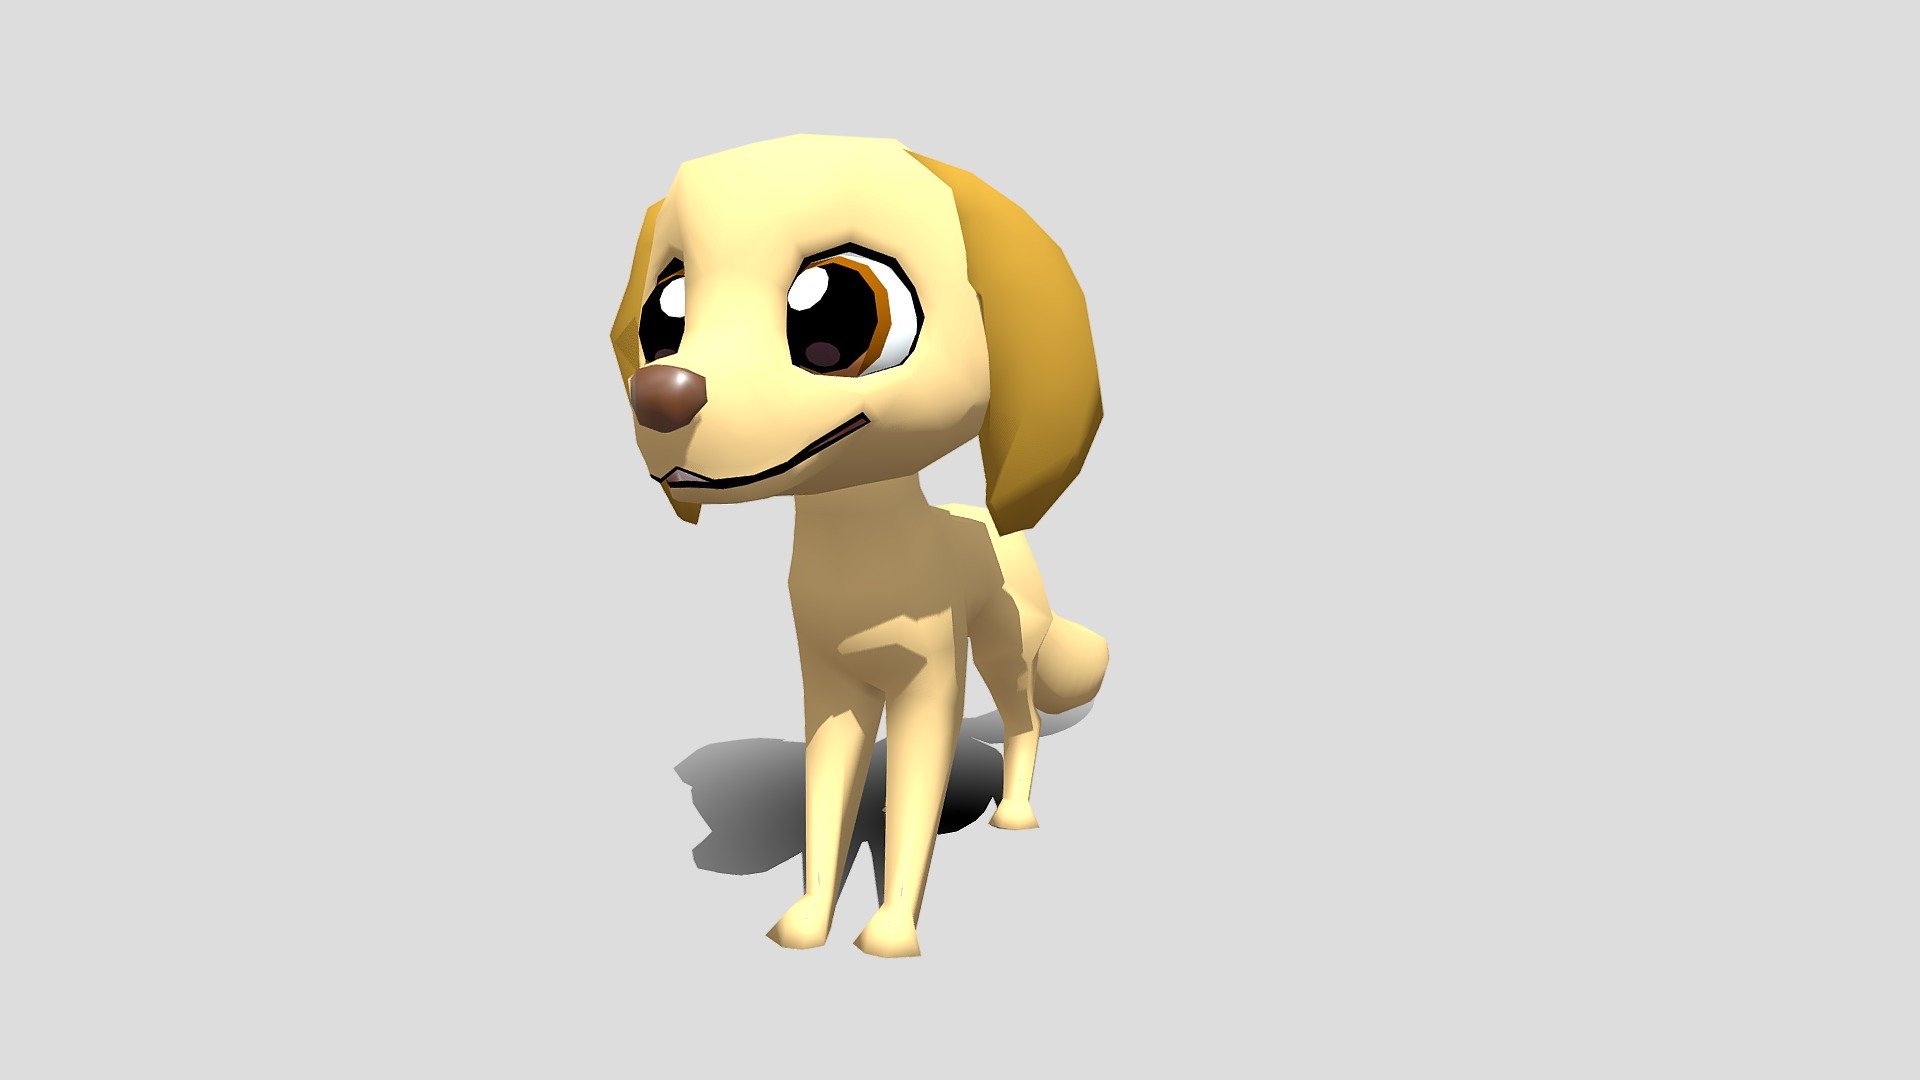 Since it has been 2 years since I posted the Stylized German Shepherd, I thought it was time to post another dog for all you dog-lovers out there.

This dog is more cartoony than the German Shepherd, and he has large puppy-dog eyes that can blink. The blink is controlled through shape keys. 

This dog is fairly low poly and has 1268 verts. Most of the verts are in the tail and the eye. His body and head are fairly low poly. 

Once I UV unwrap this dog and add more animations, I plan on making him a free downloadable. This dog is based on a Golden Retriever 3d model